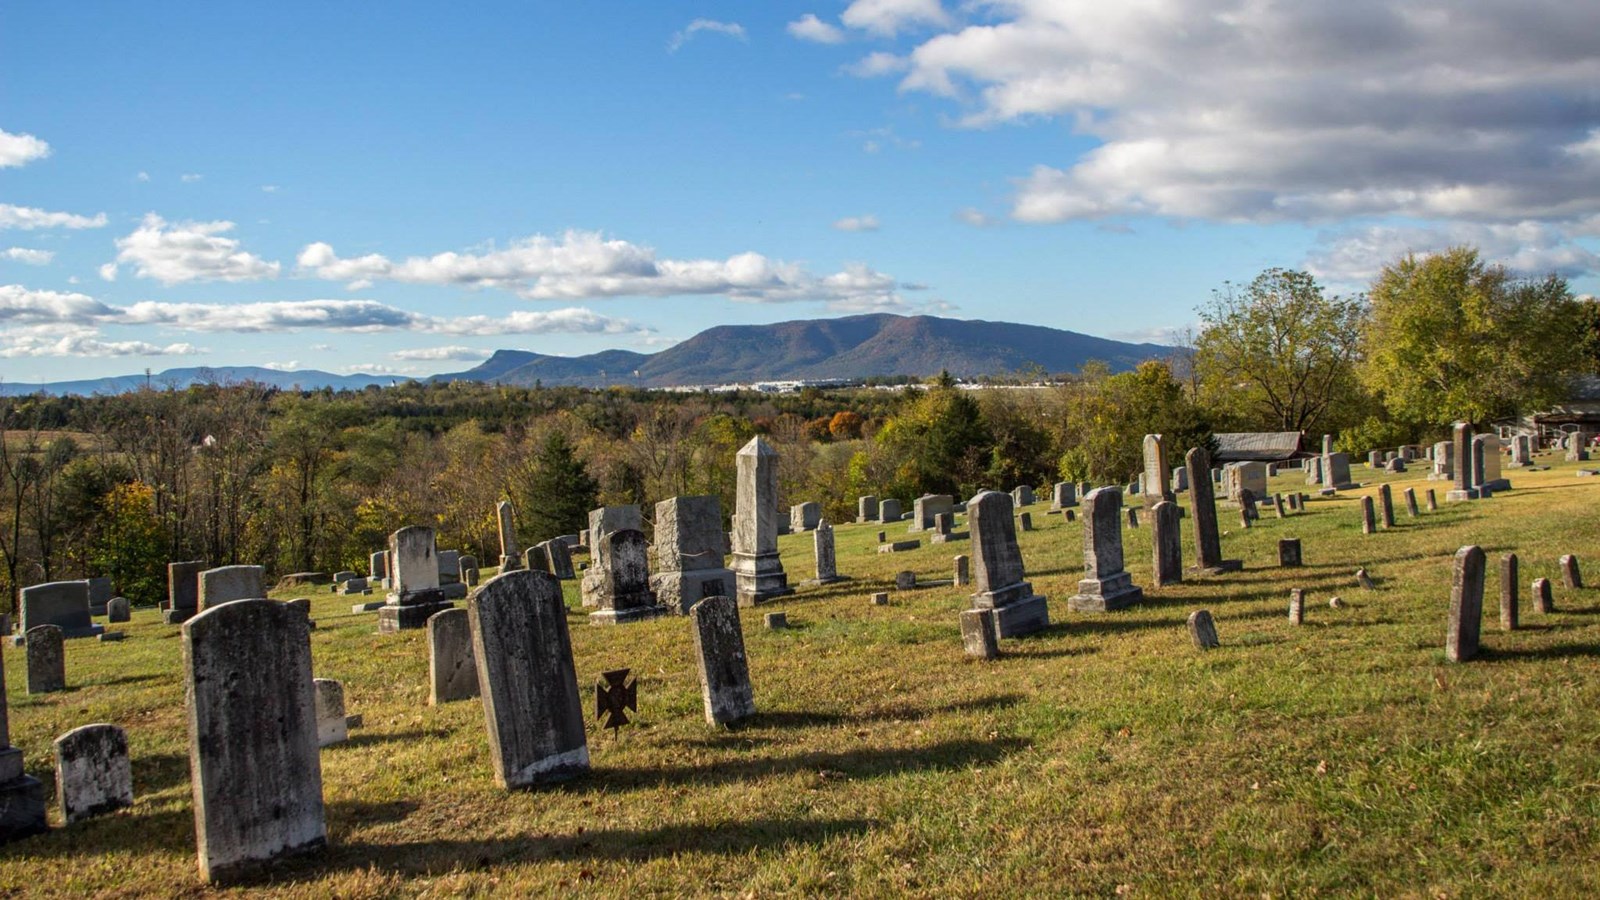 Thin, weathered gravestones mark graves on a hill in a mountain valley.